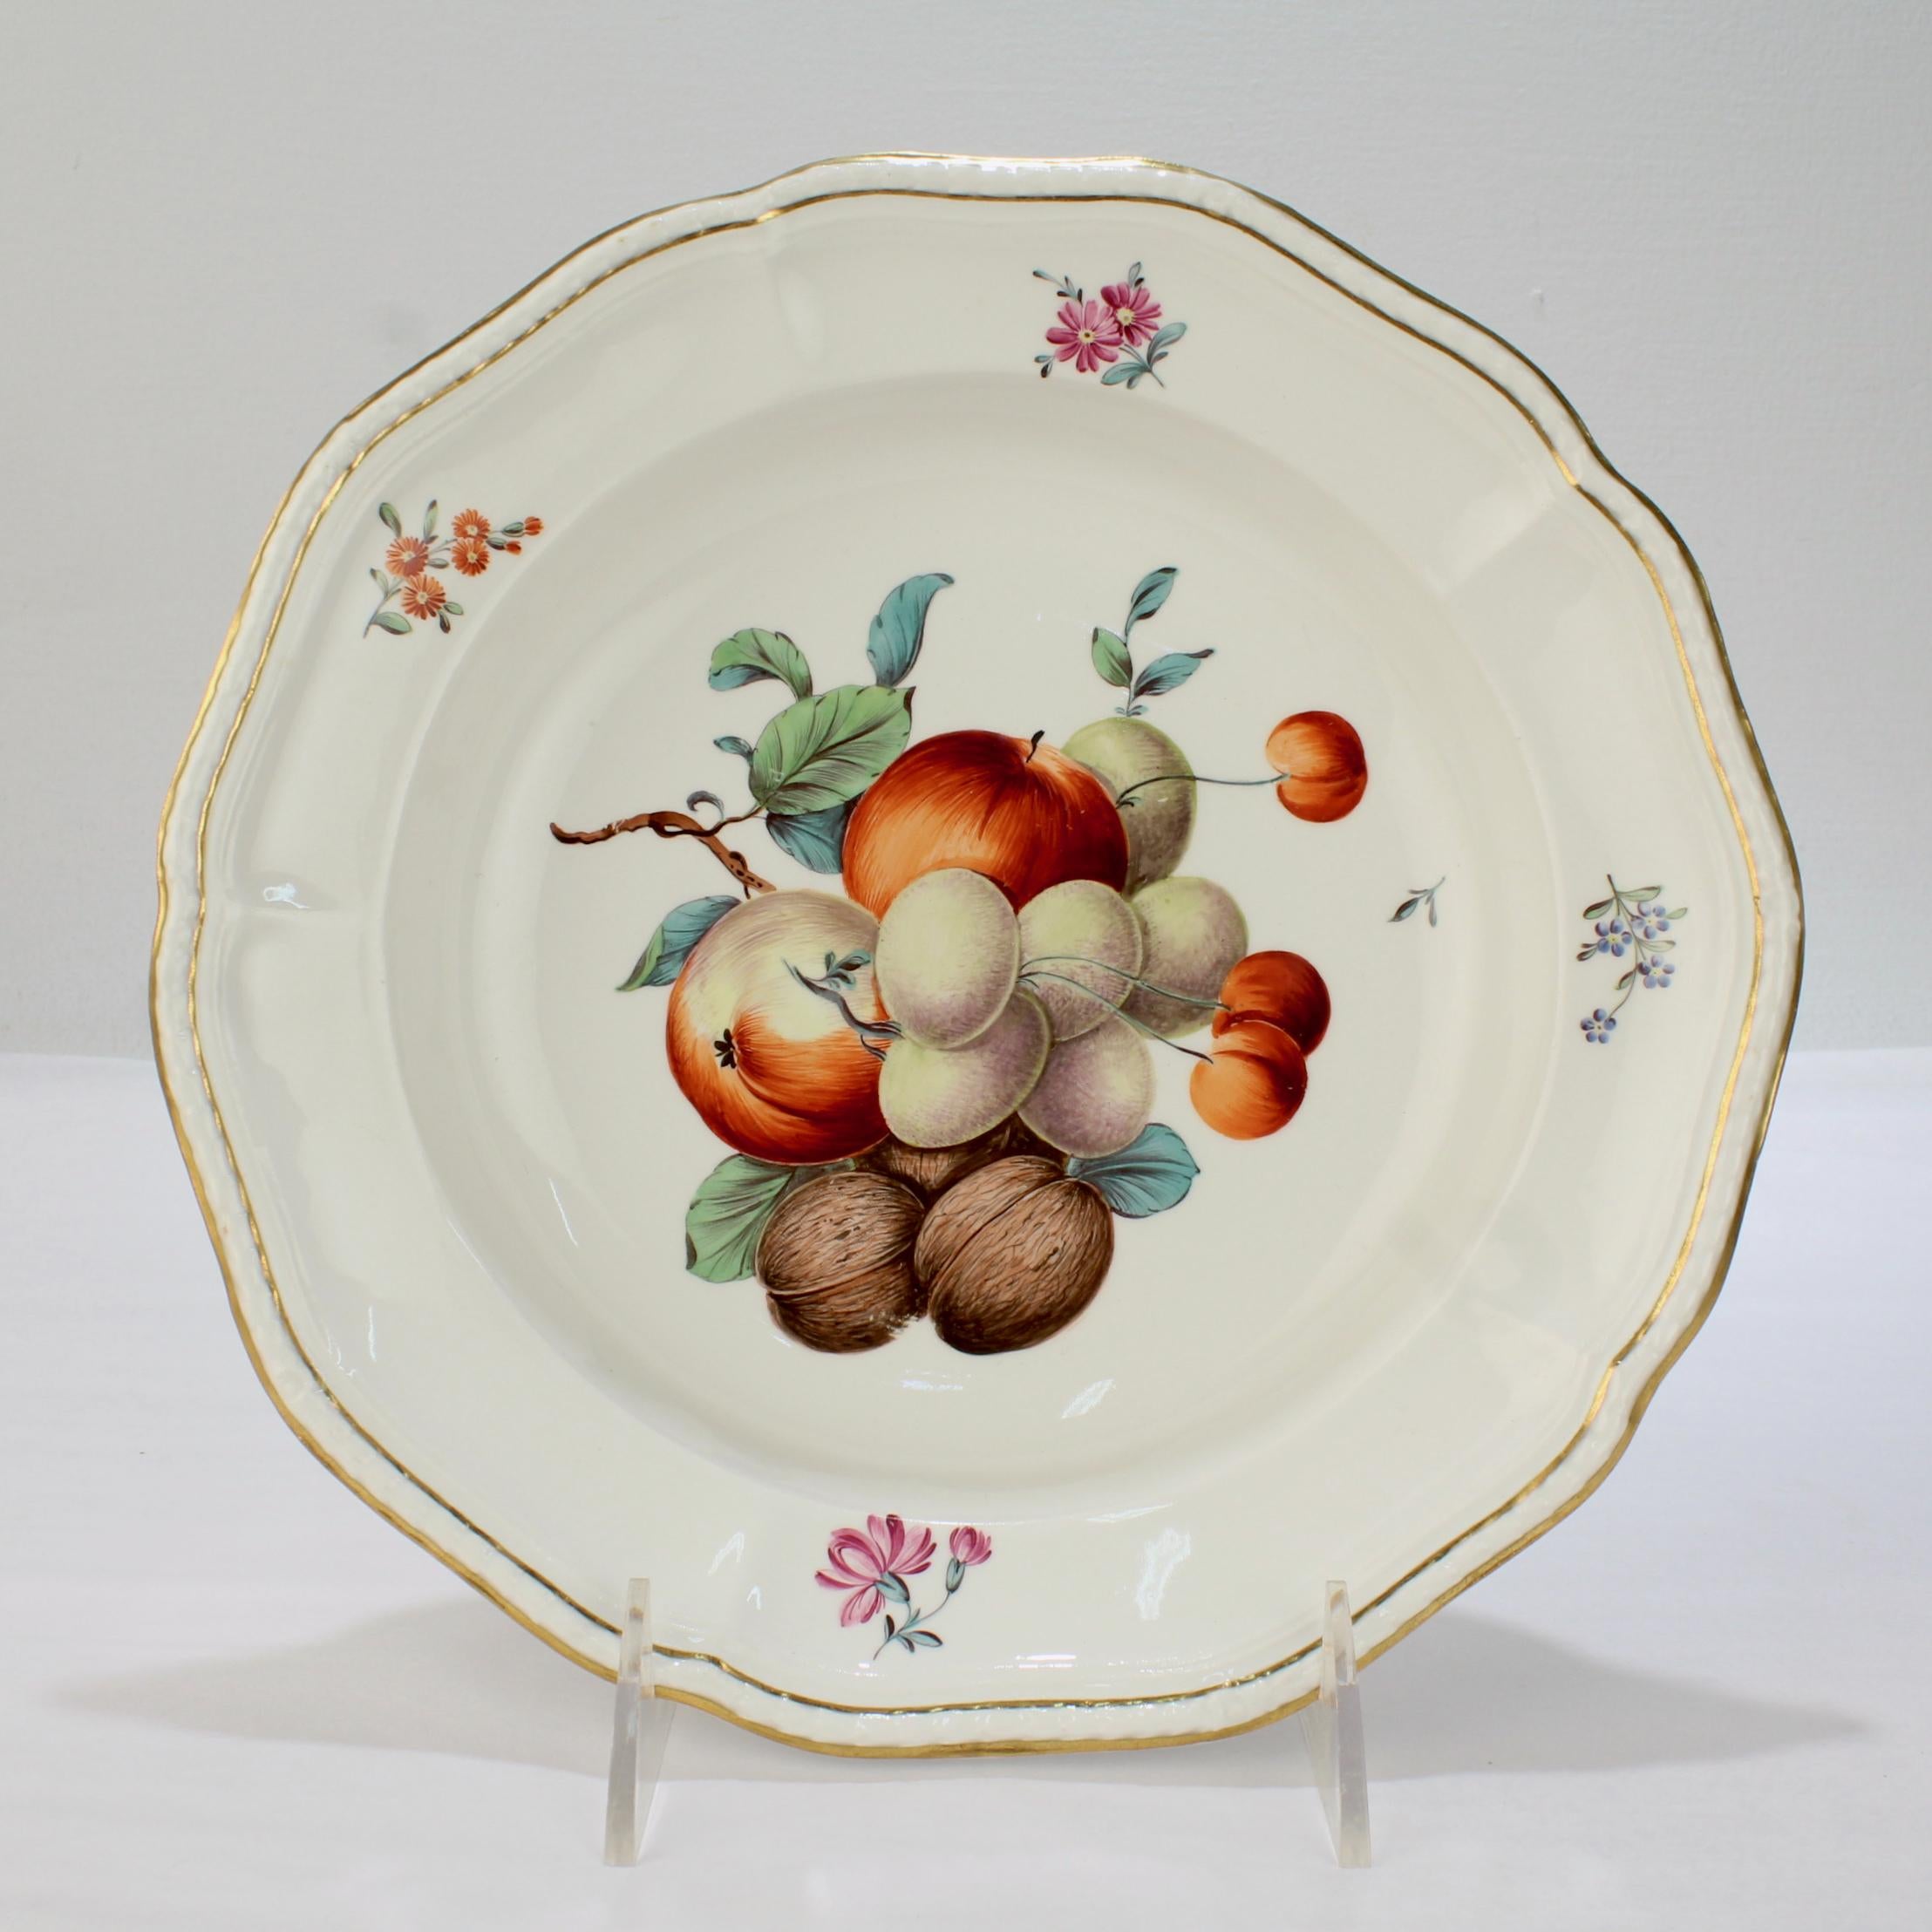 A very fine antique 18th century porcelain bowl.

By Frankenthal during the Carl Theodor period.

With a group of polychrome enamel decorated fruit and nuts to the bowl, floral sprays to the border, and a gilt edged, molded rim.

Simply a